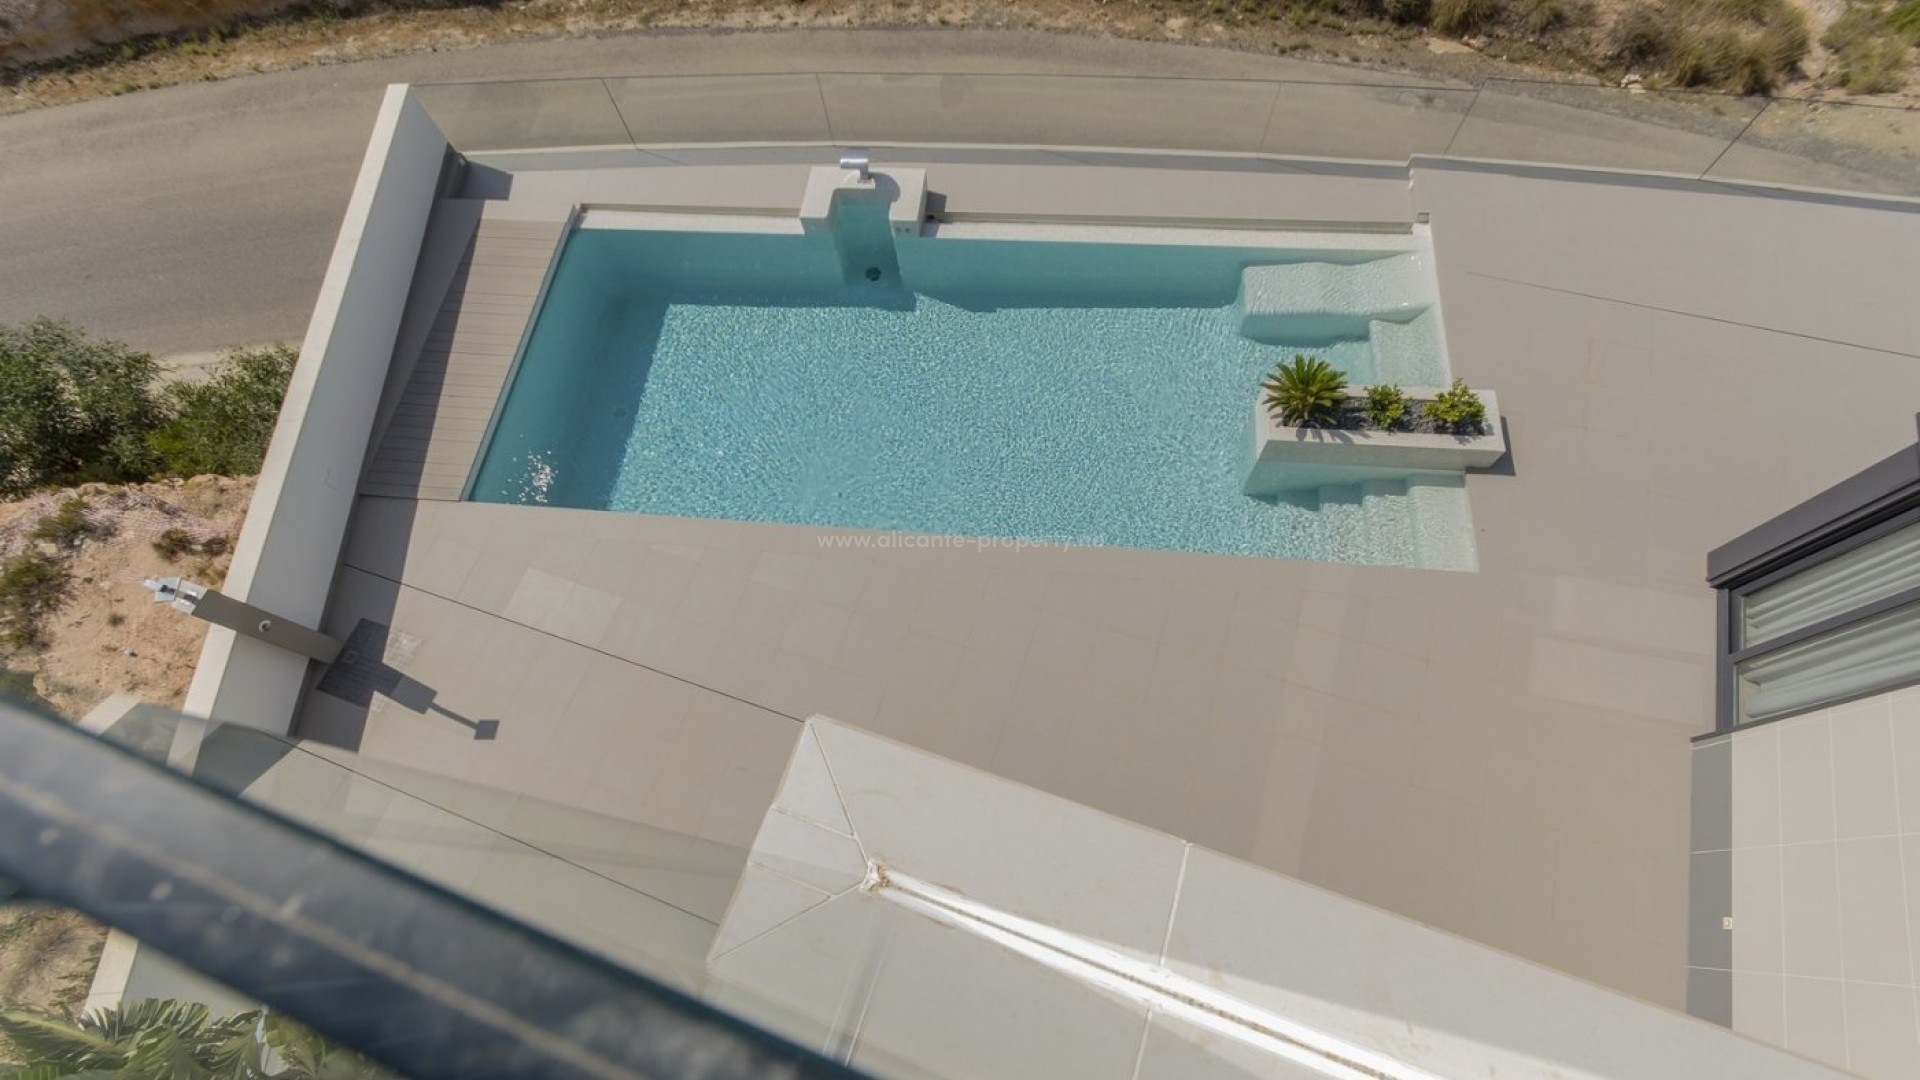 New bespoke houses/villas 250m from the beach in Campoamor, can include from 2 to 5 bedrooms, four minutes from the beaches of Orihuela and close to all services.